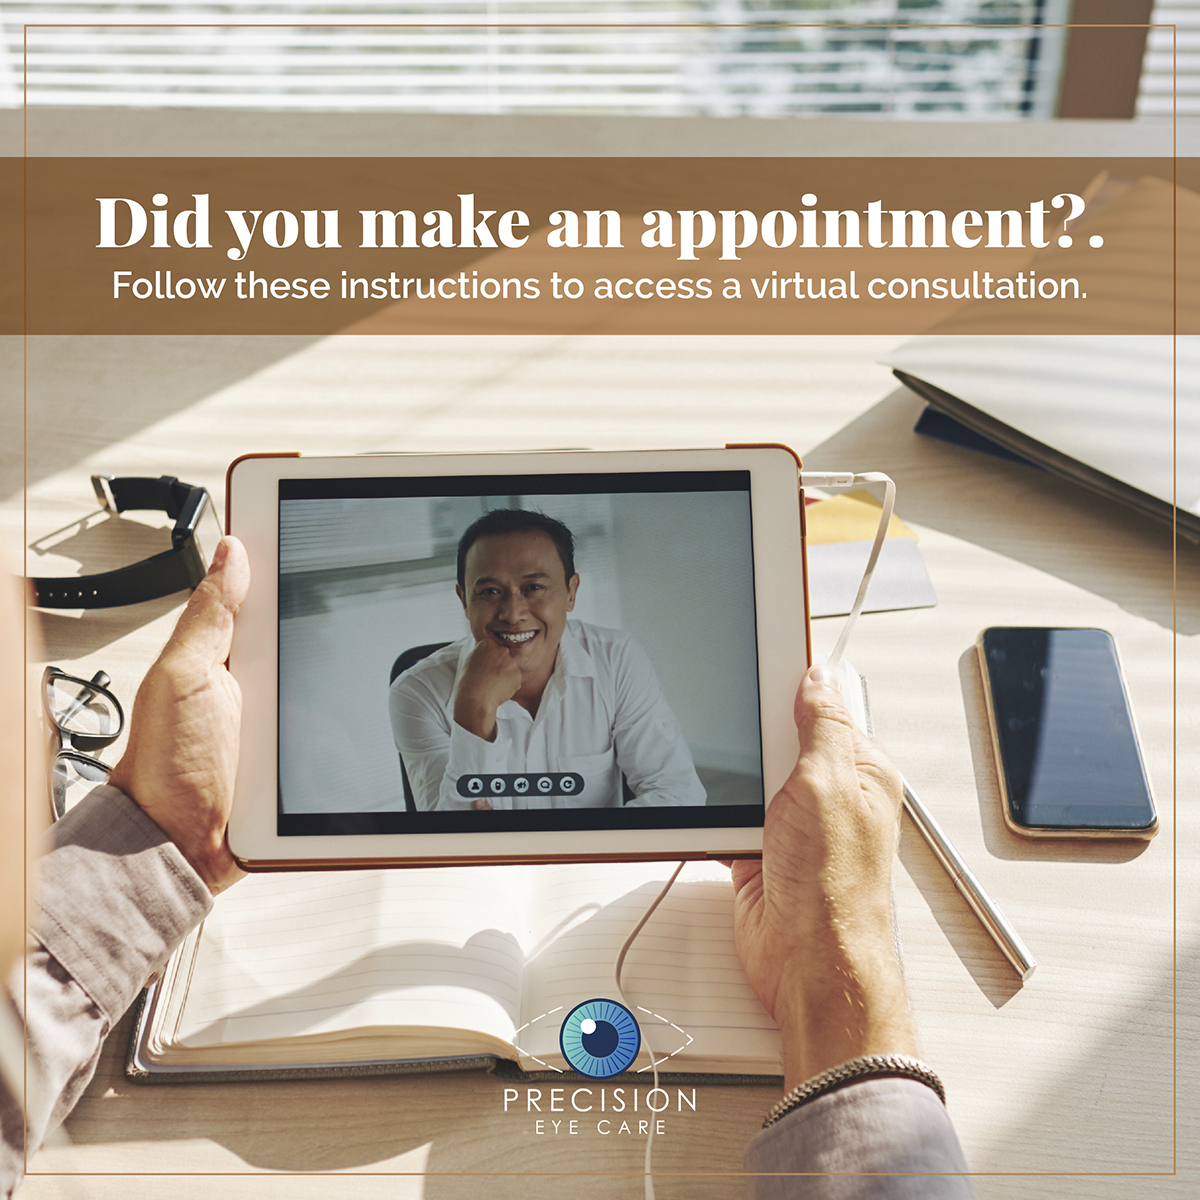 Did you make an appointment?